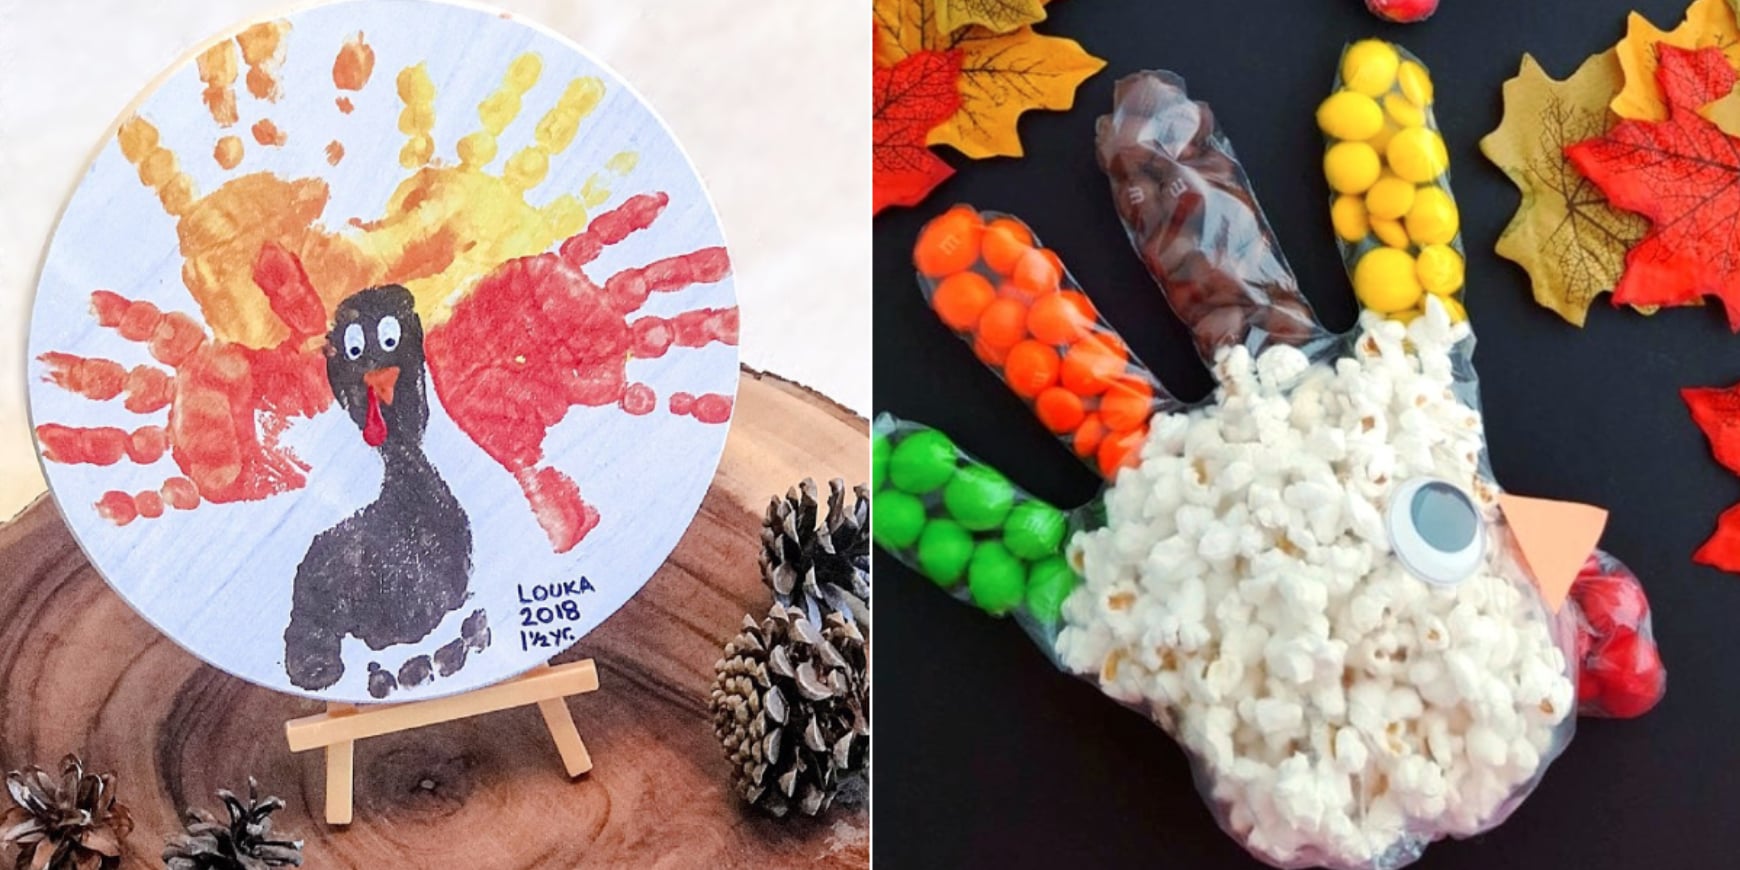 Pipe Cleaner Turkey: A Colorful, Fun Kids Craft - My Growing Creative Life